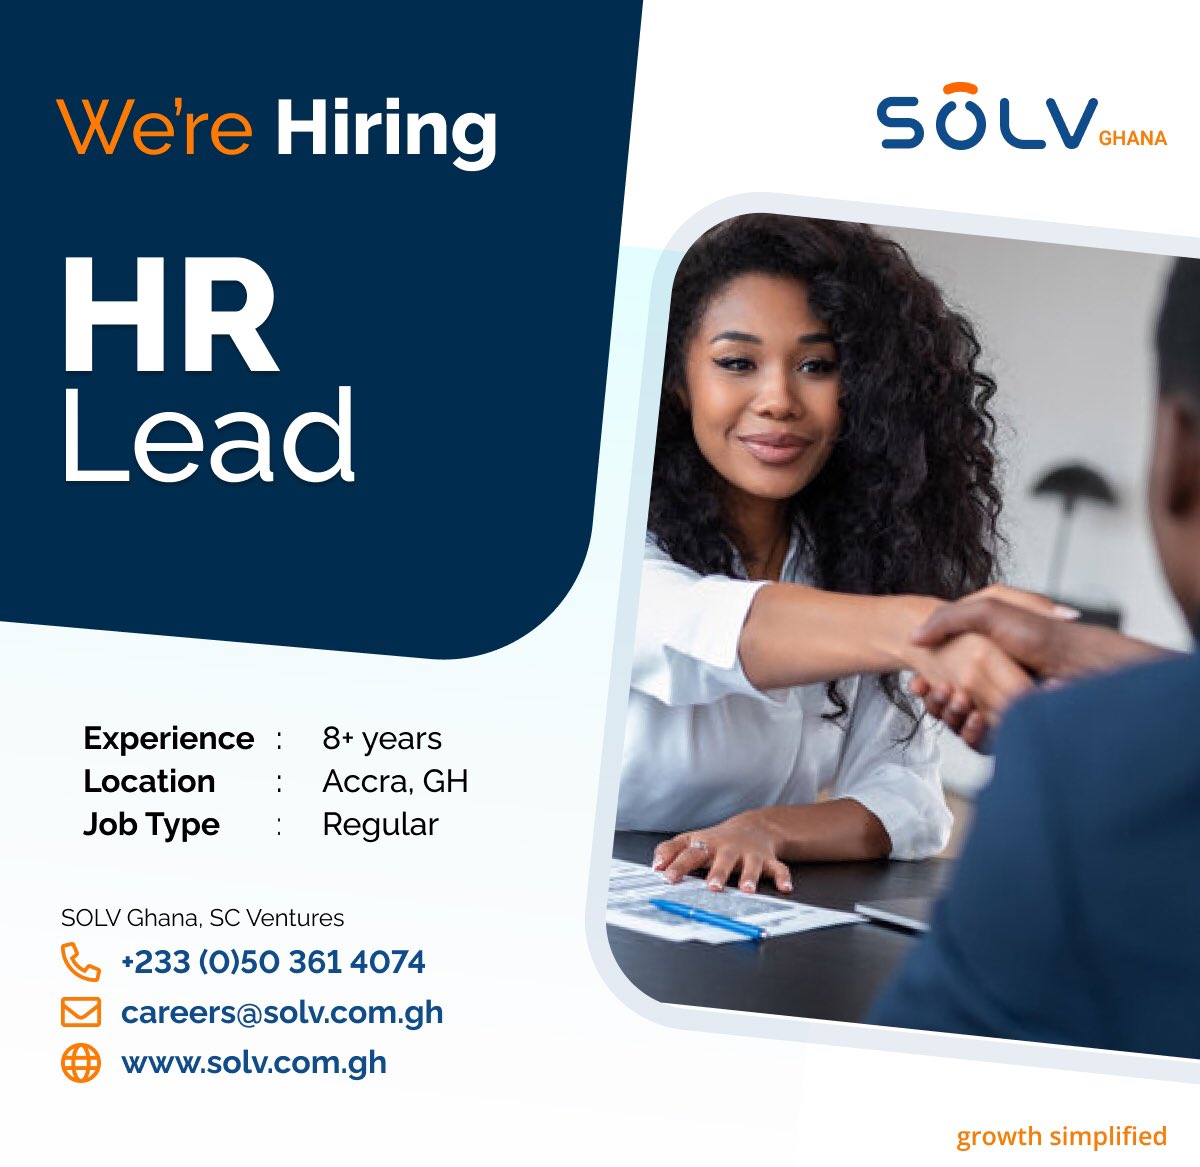 Join the #SOLVers!

If you're passionate about talent management, employee engagement, and organizational development, we want to hear from you. 

Apply today and help shape the future of our team! 

#SOLVGhana #GrowthSimplified #Careers #HRLead #NowHiring #BecomingSOLVer